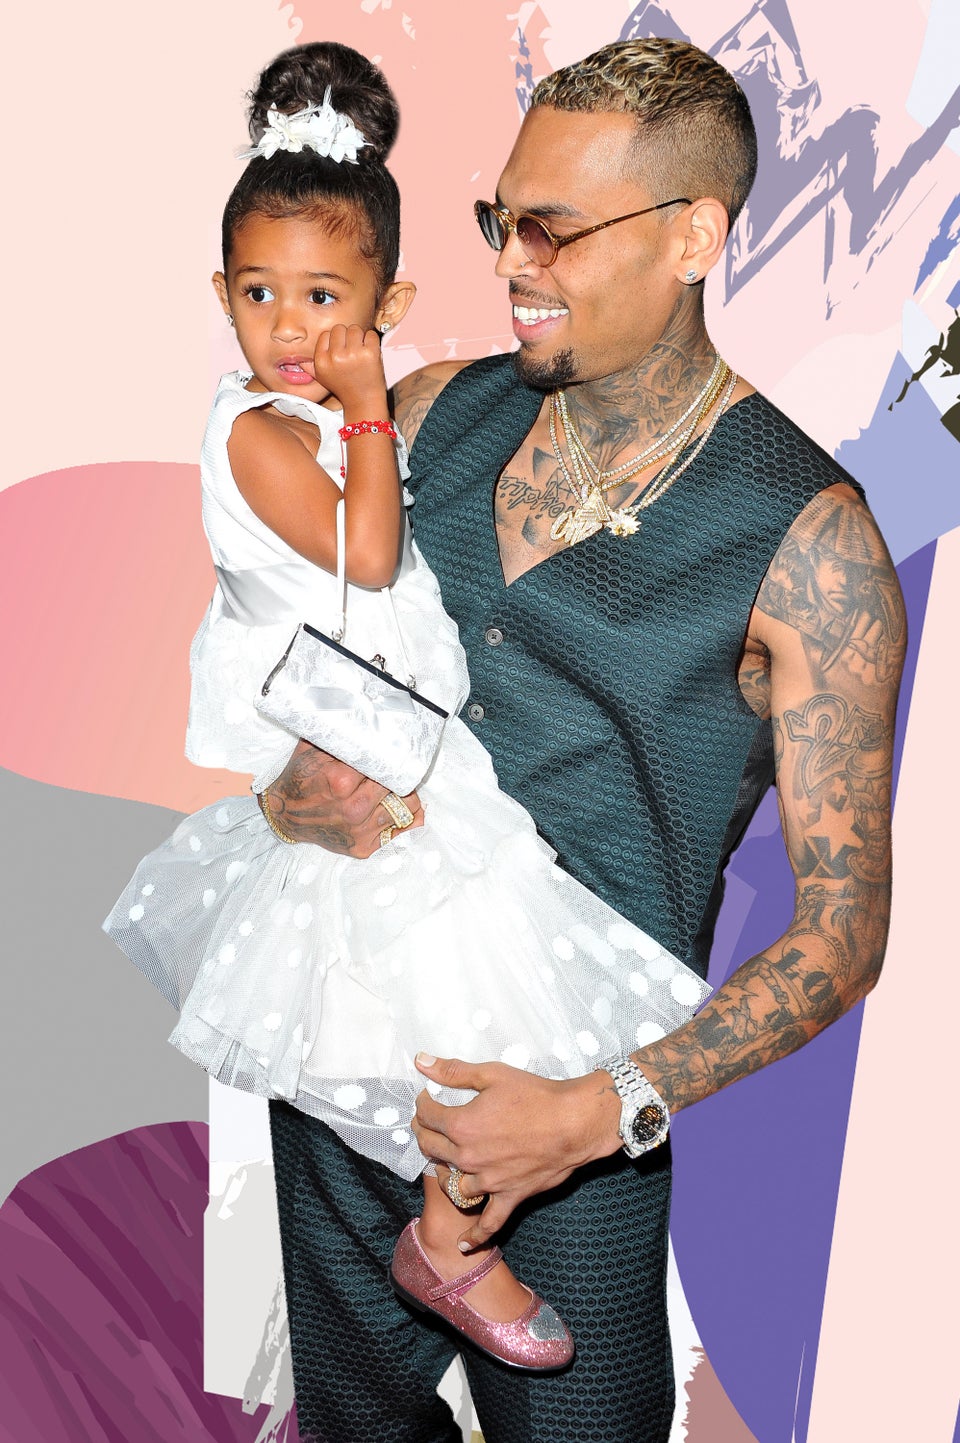 Chris Brown’s Adorable 3-Year-Old Daughter Now Has Her Own Kid’s Clothing & Cosmetics Line